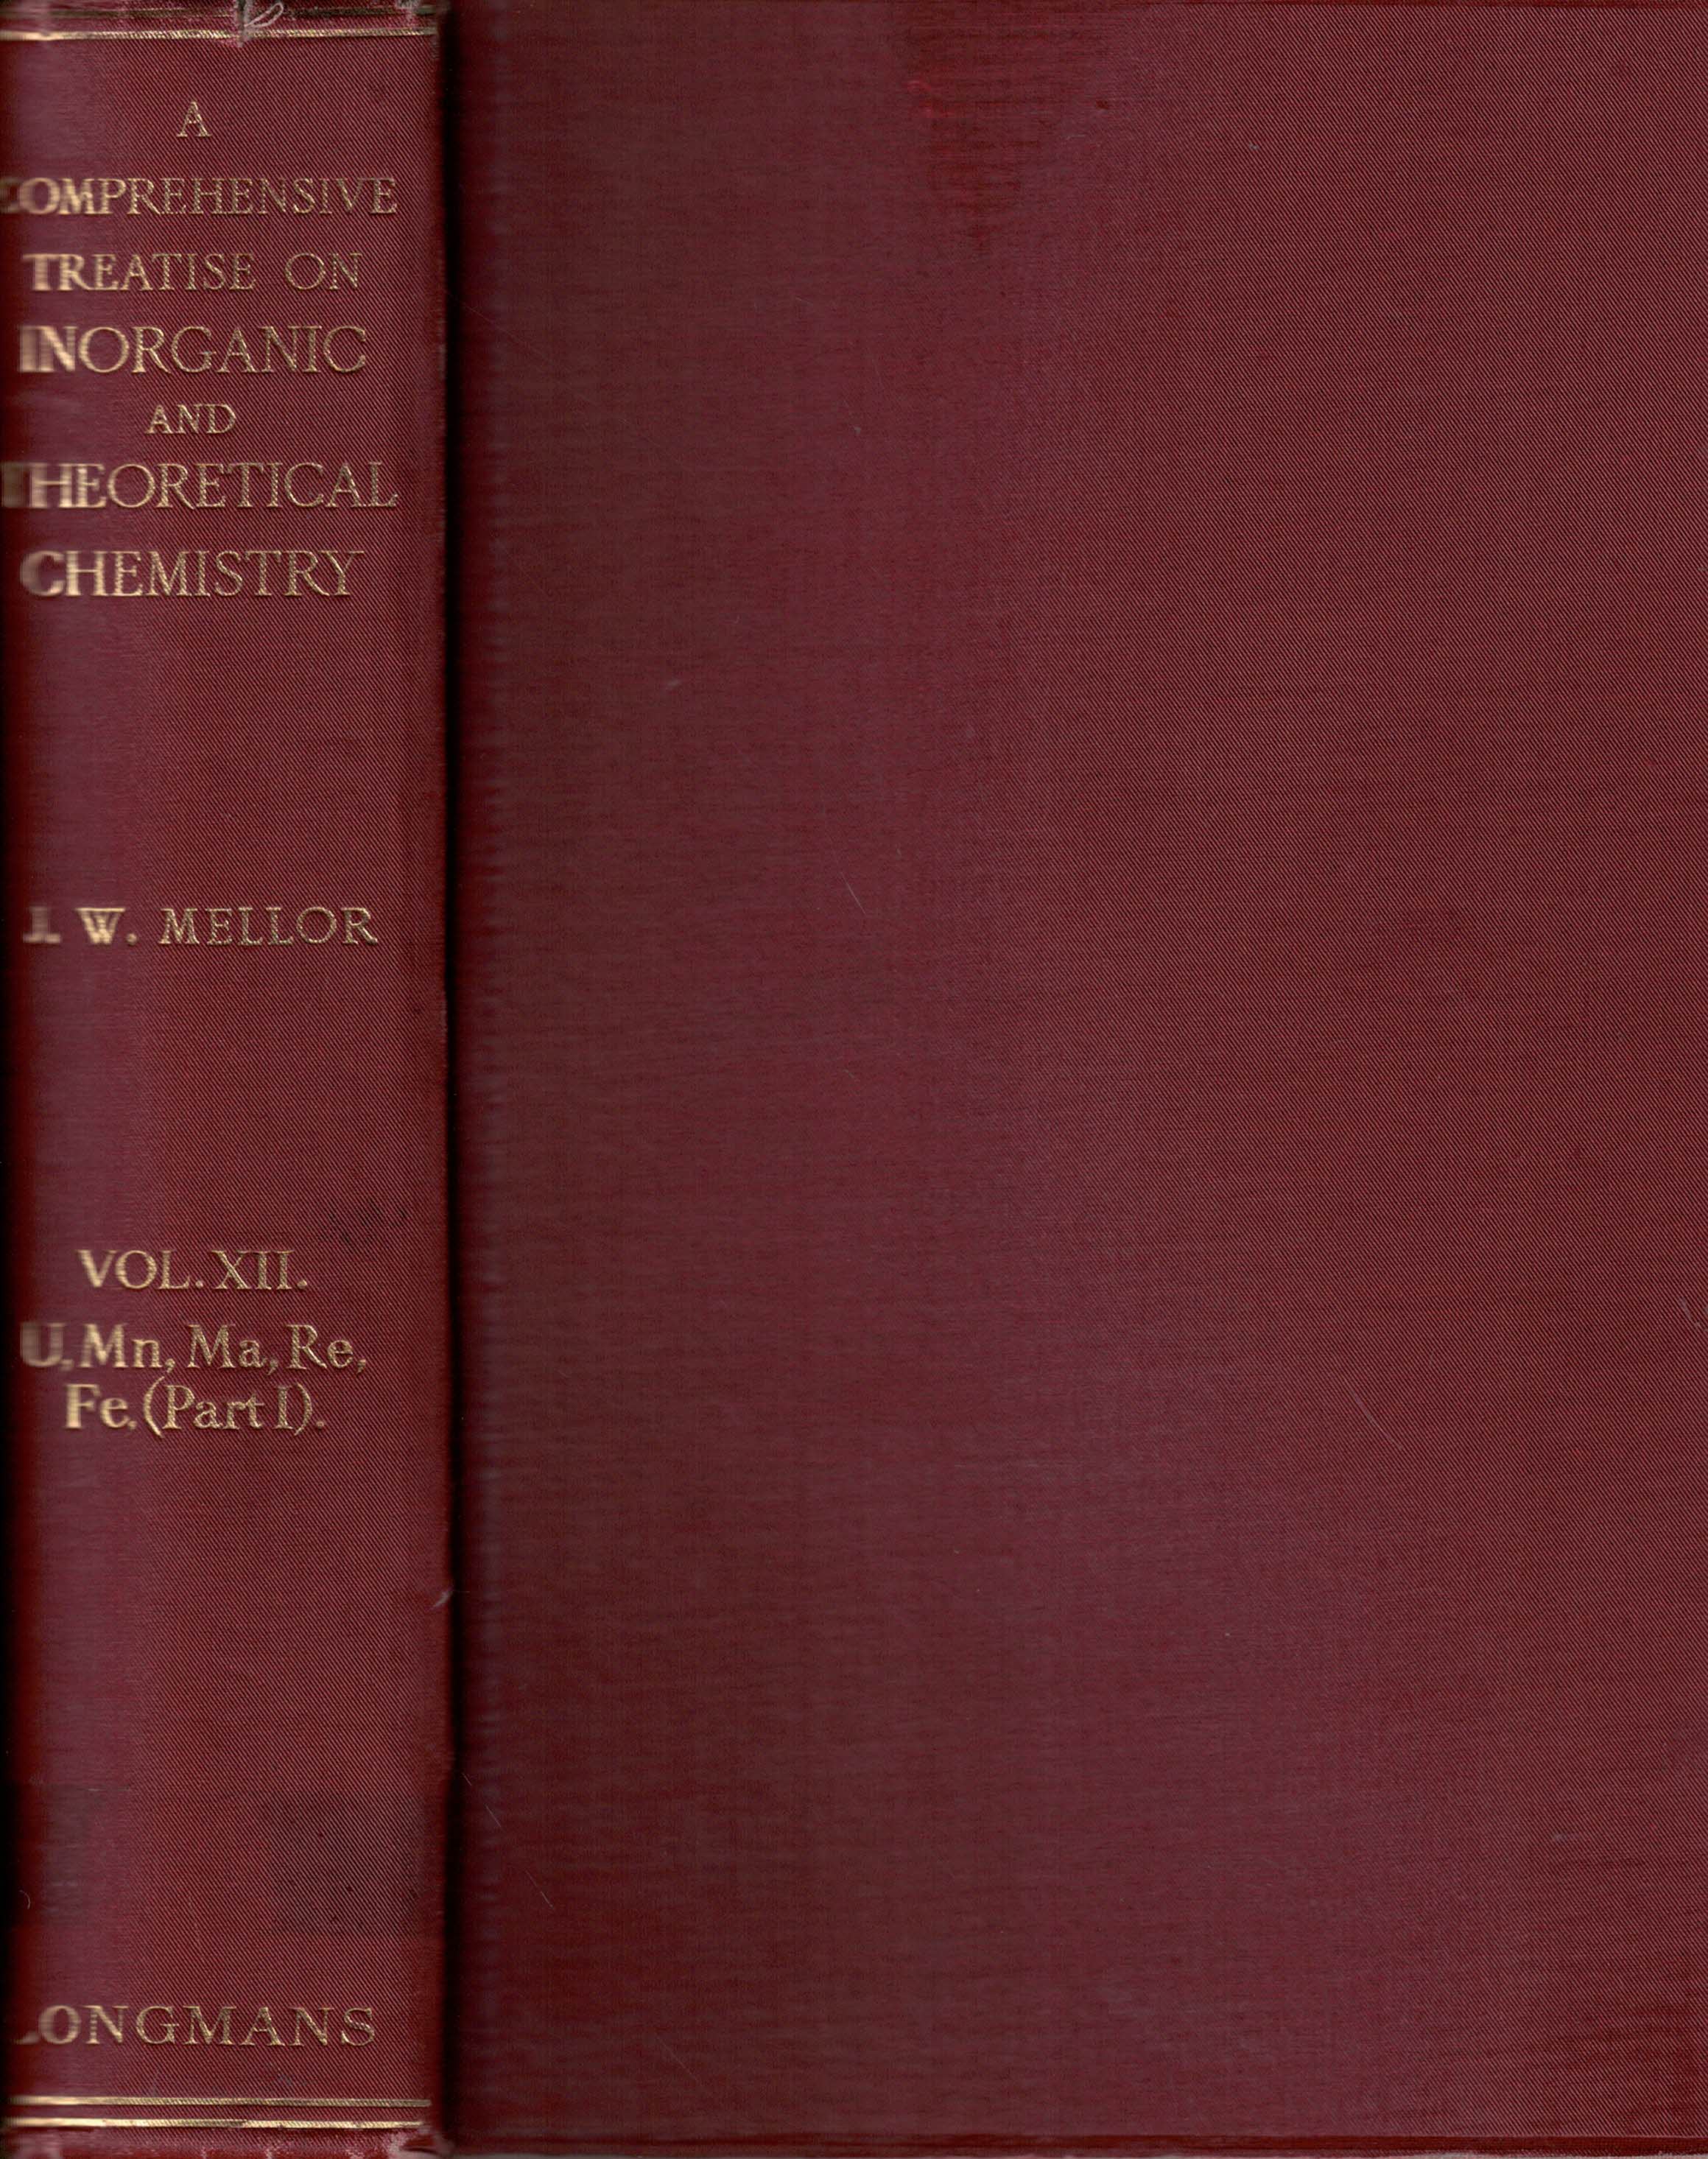 A Comprehensive Treatise on Inorganic and Theoretical Chemistry. Volume XII. U, Mn, Ma and Re, Fe.